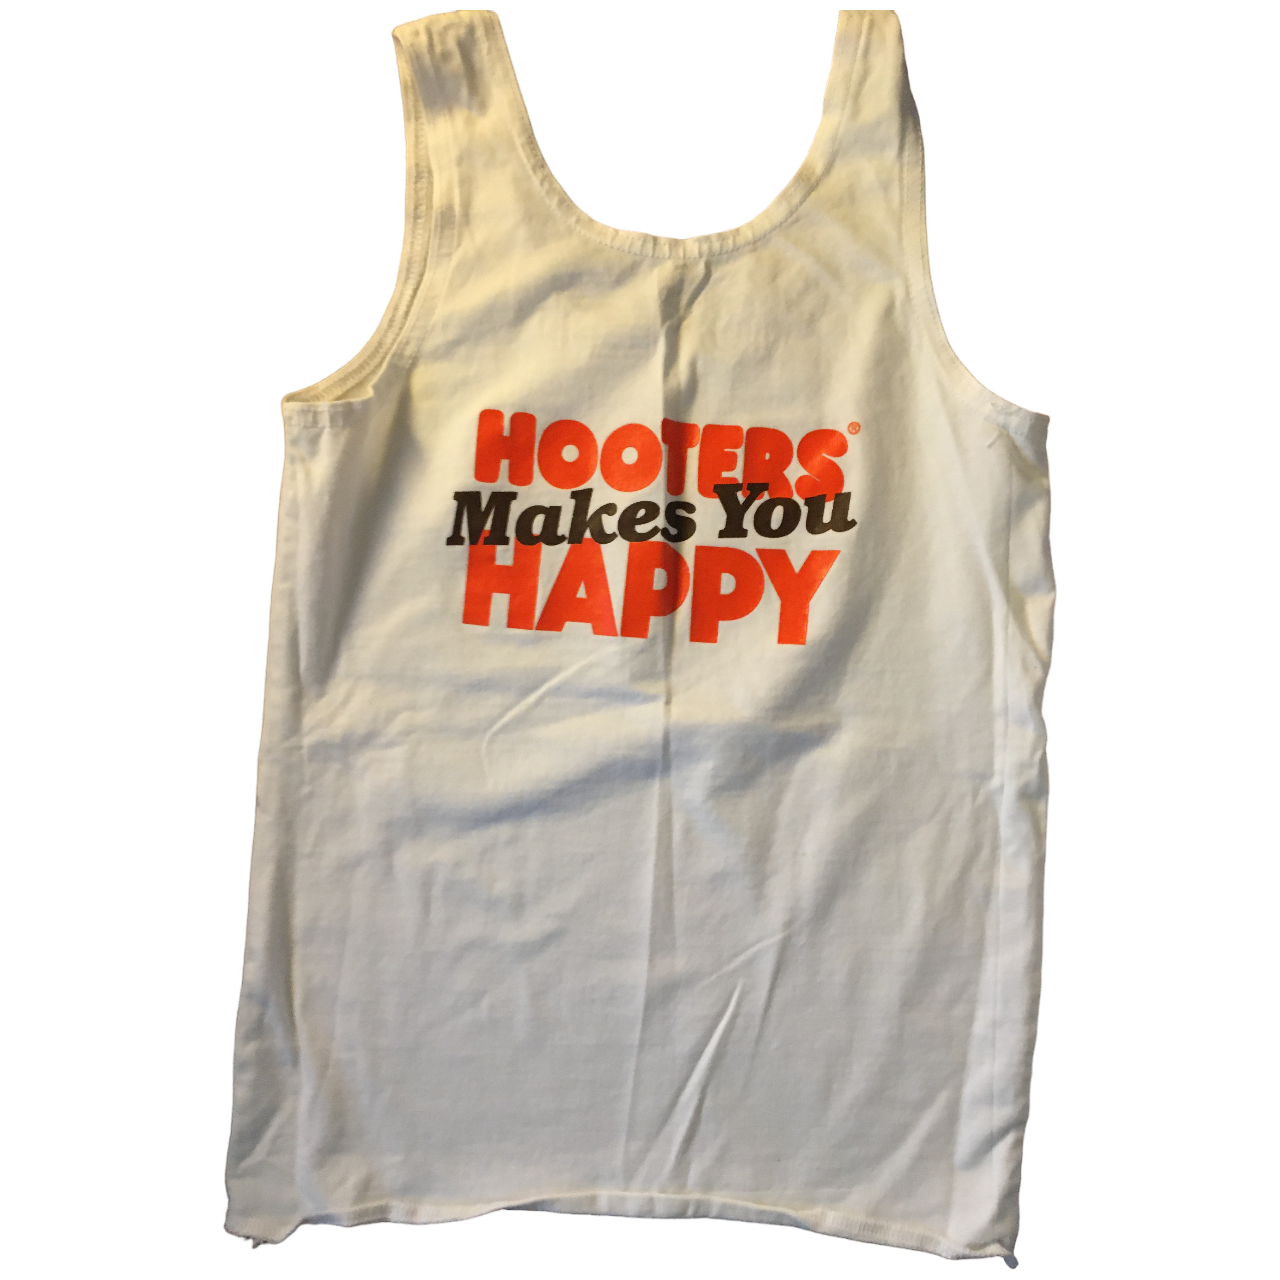 Hooters Women's Outfit Costume New Logo White Tank Top